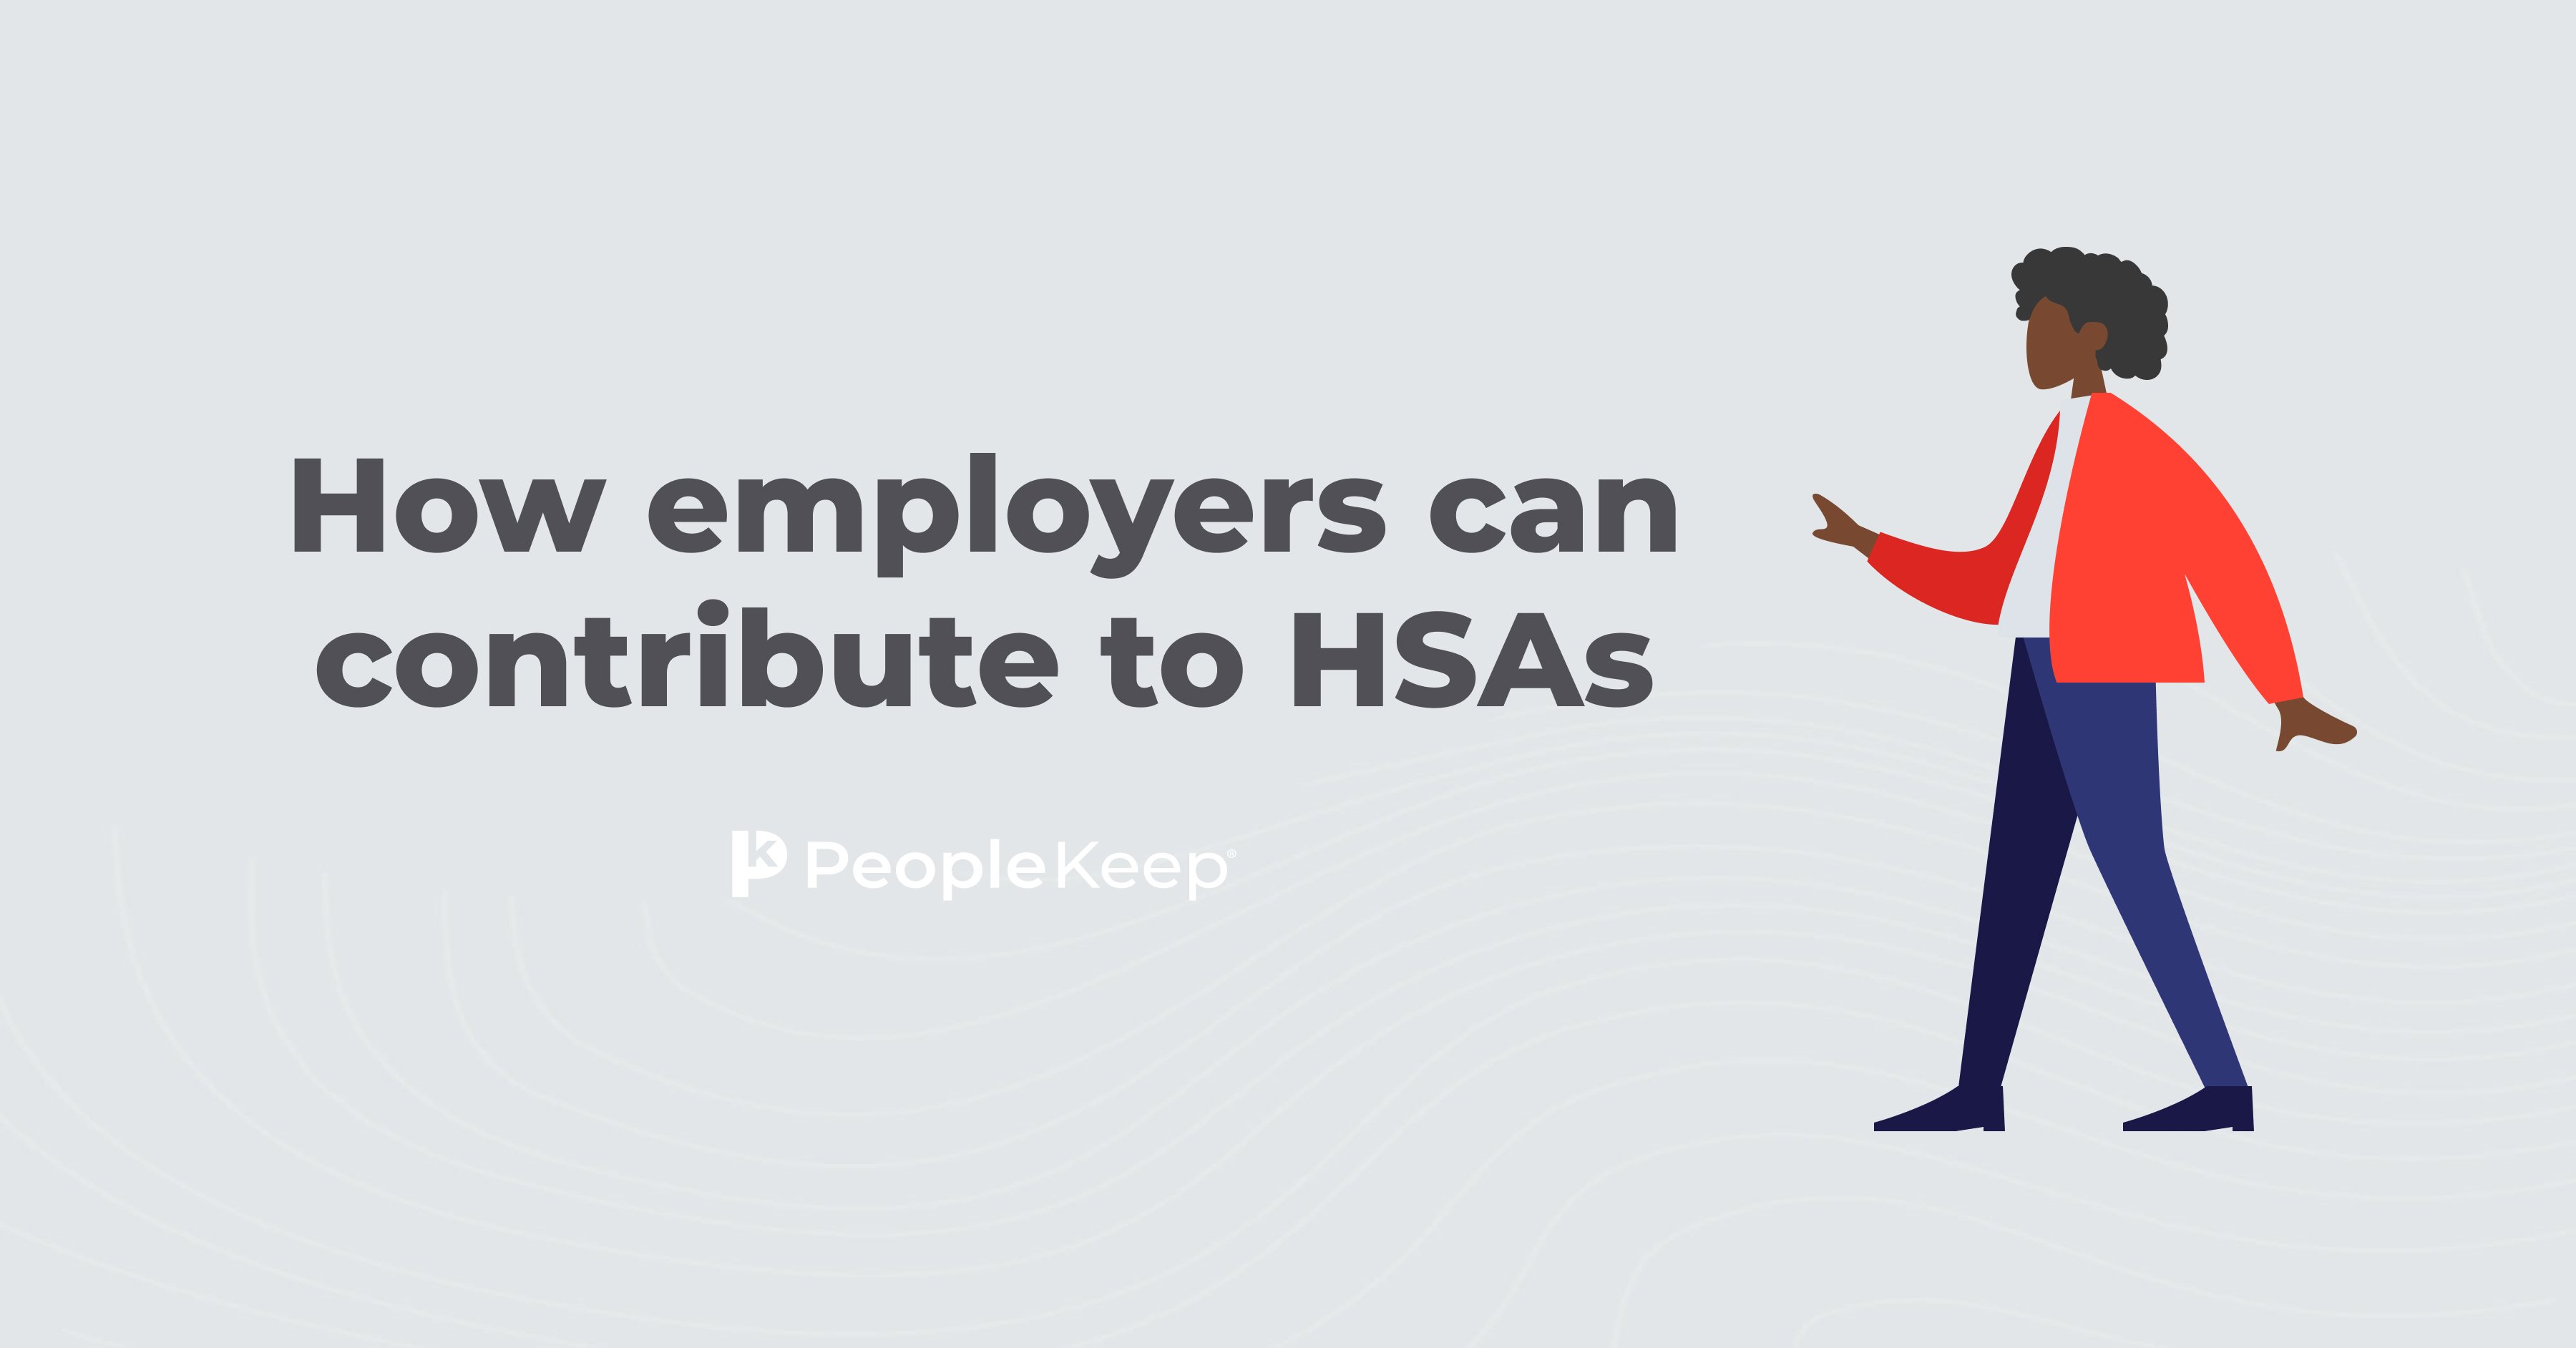 How employers can contribute to HSAs